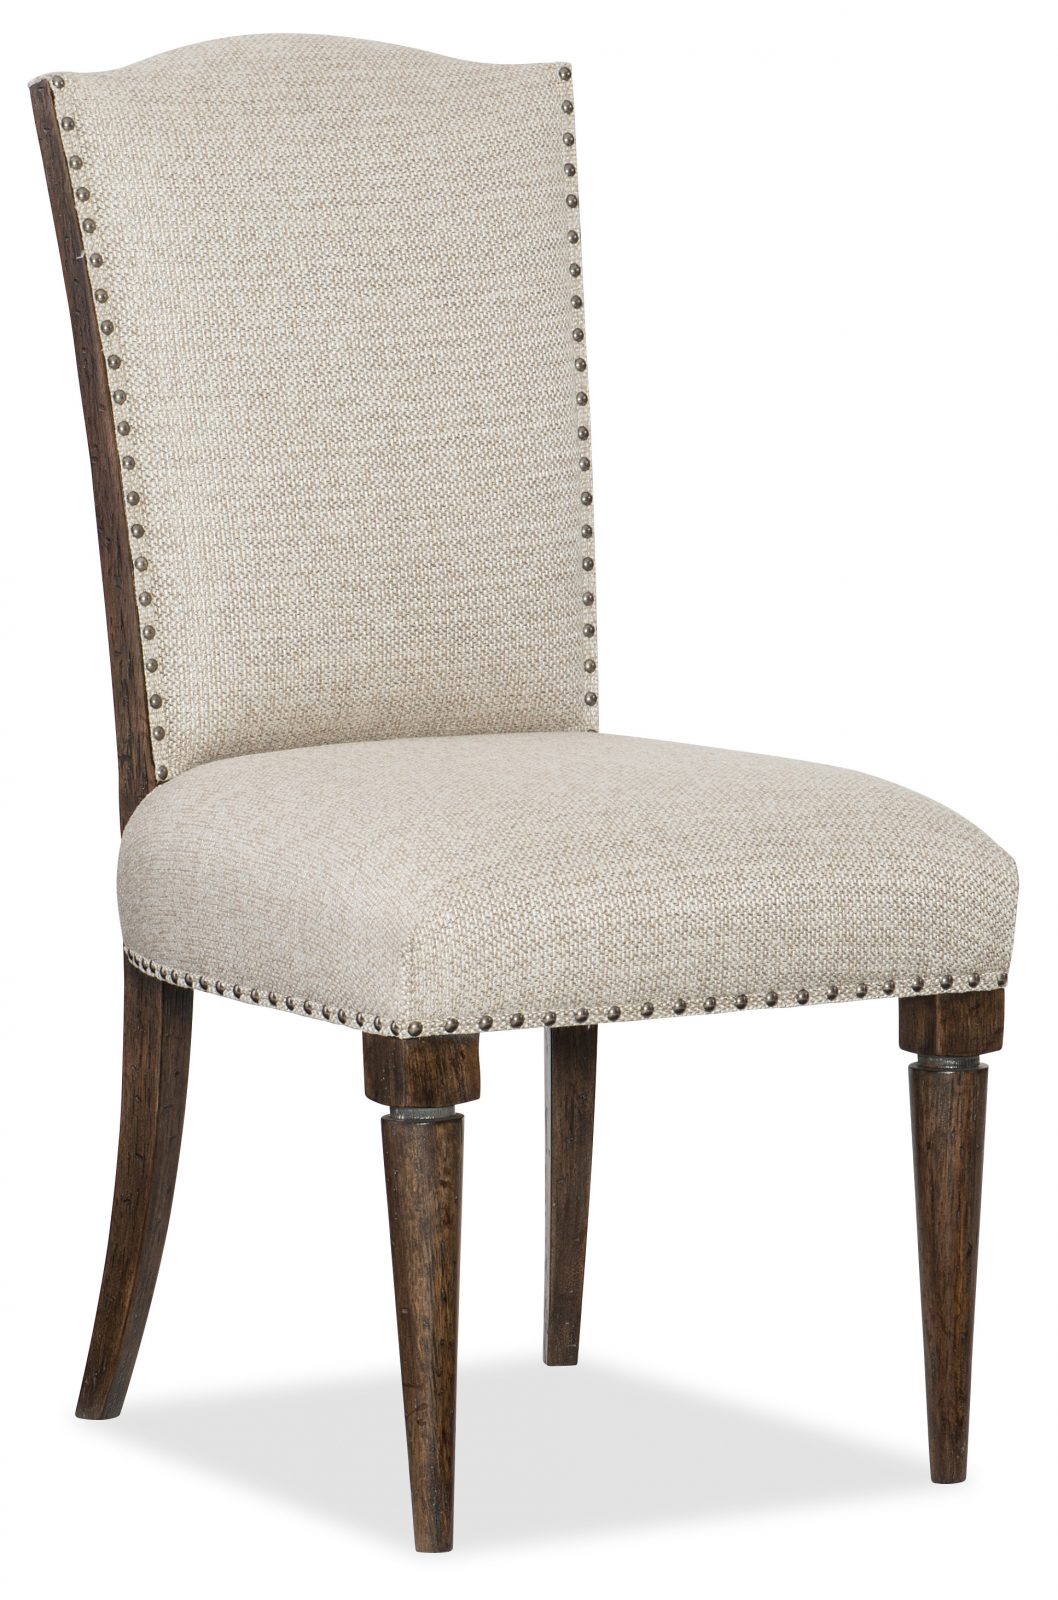 American Life - Roslyn County Deconstructed upholstered side chair